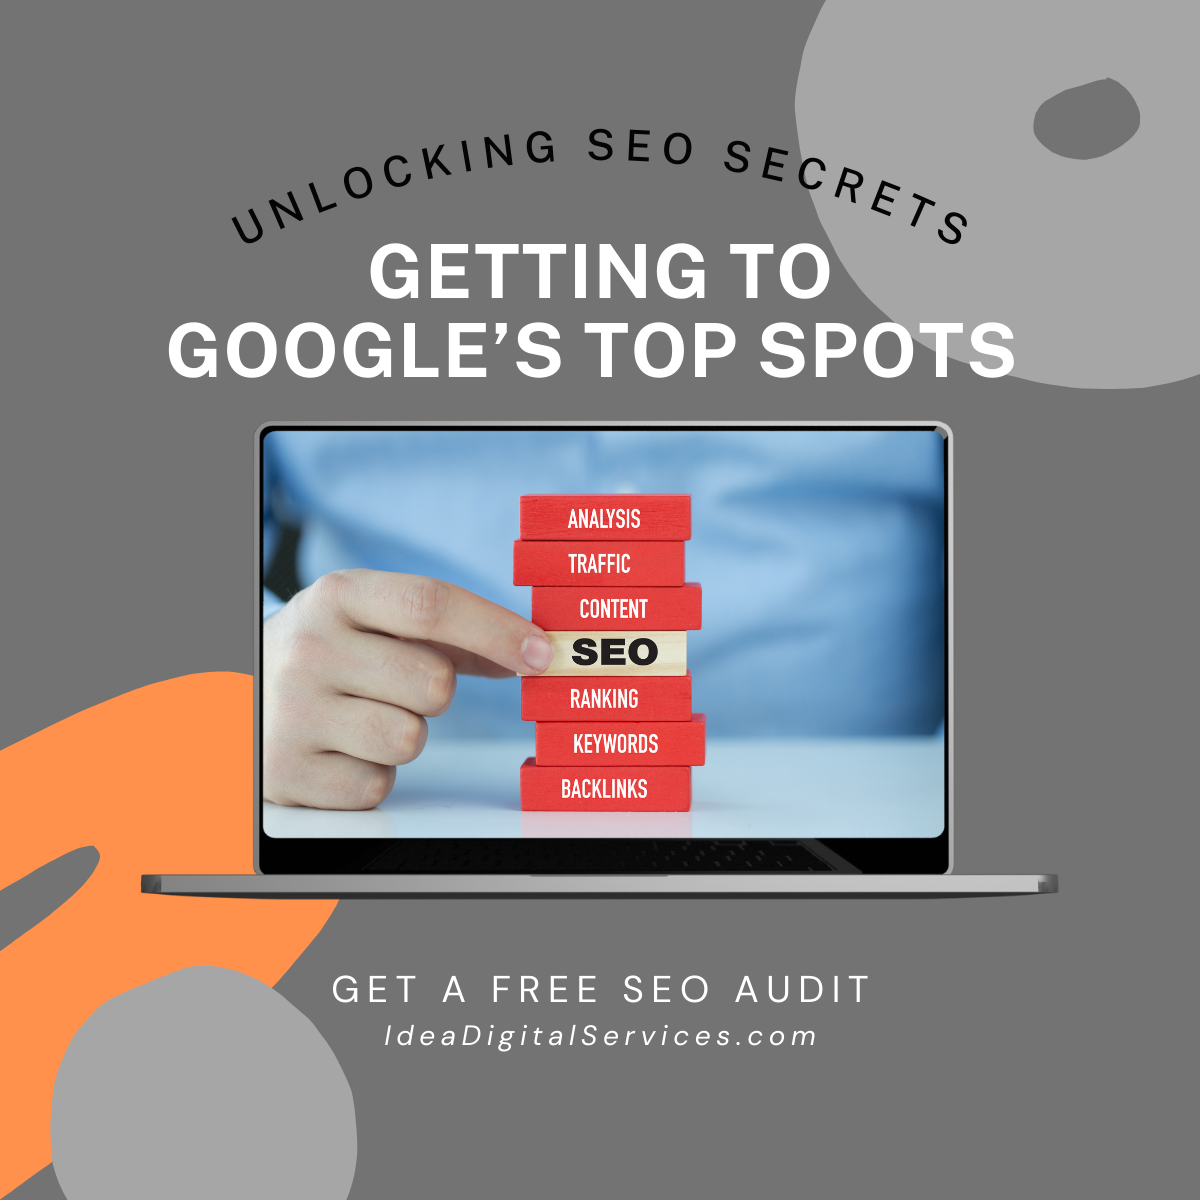 Unlocking the Secrets of Google’s Top Spots with SEO